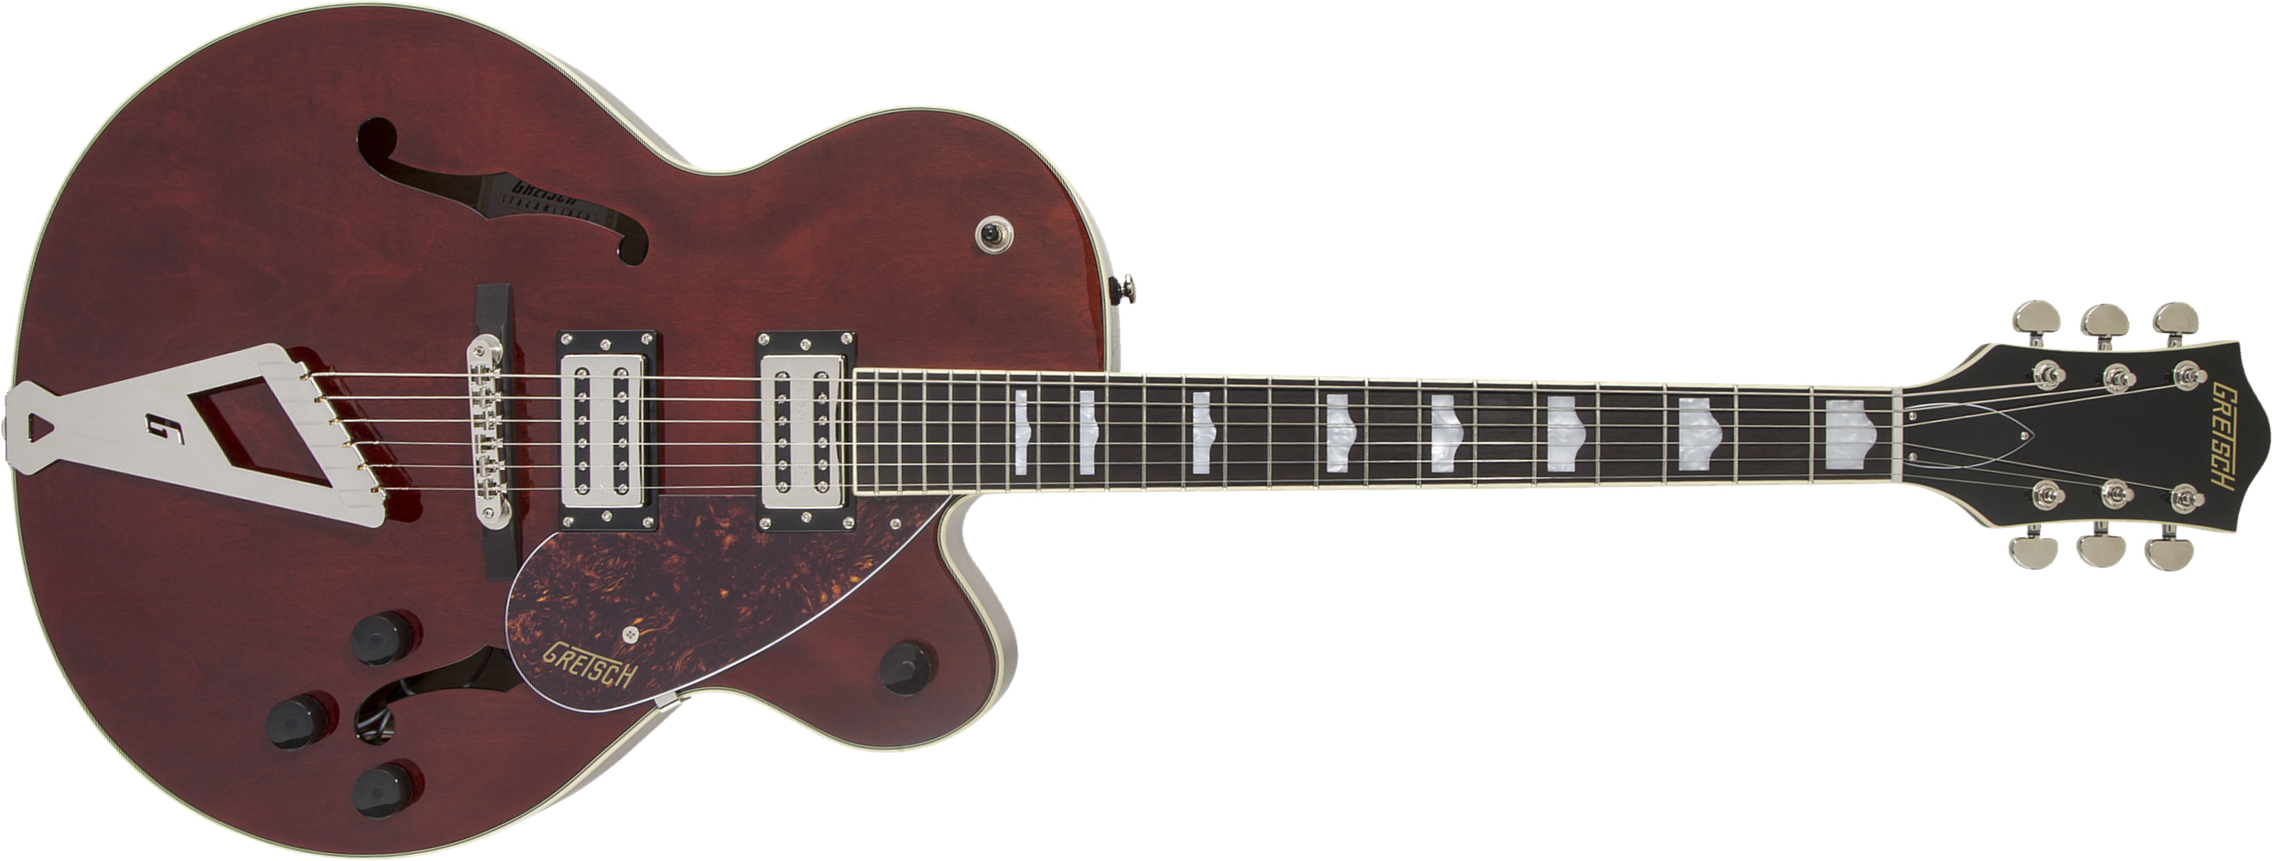 Gretsch G2420 Streamliner Hollow Body With Chromatic Ii Hh Ht Lau - Walnut - Semi-hollow electric guitar - Main picture